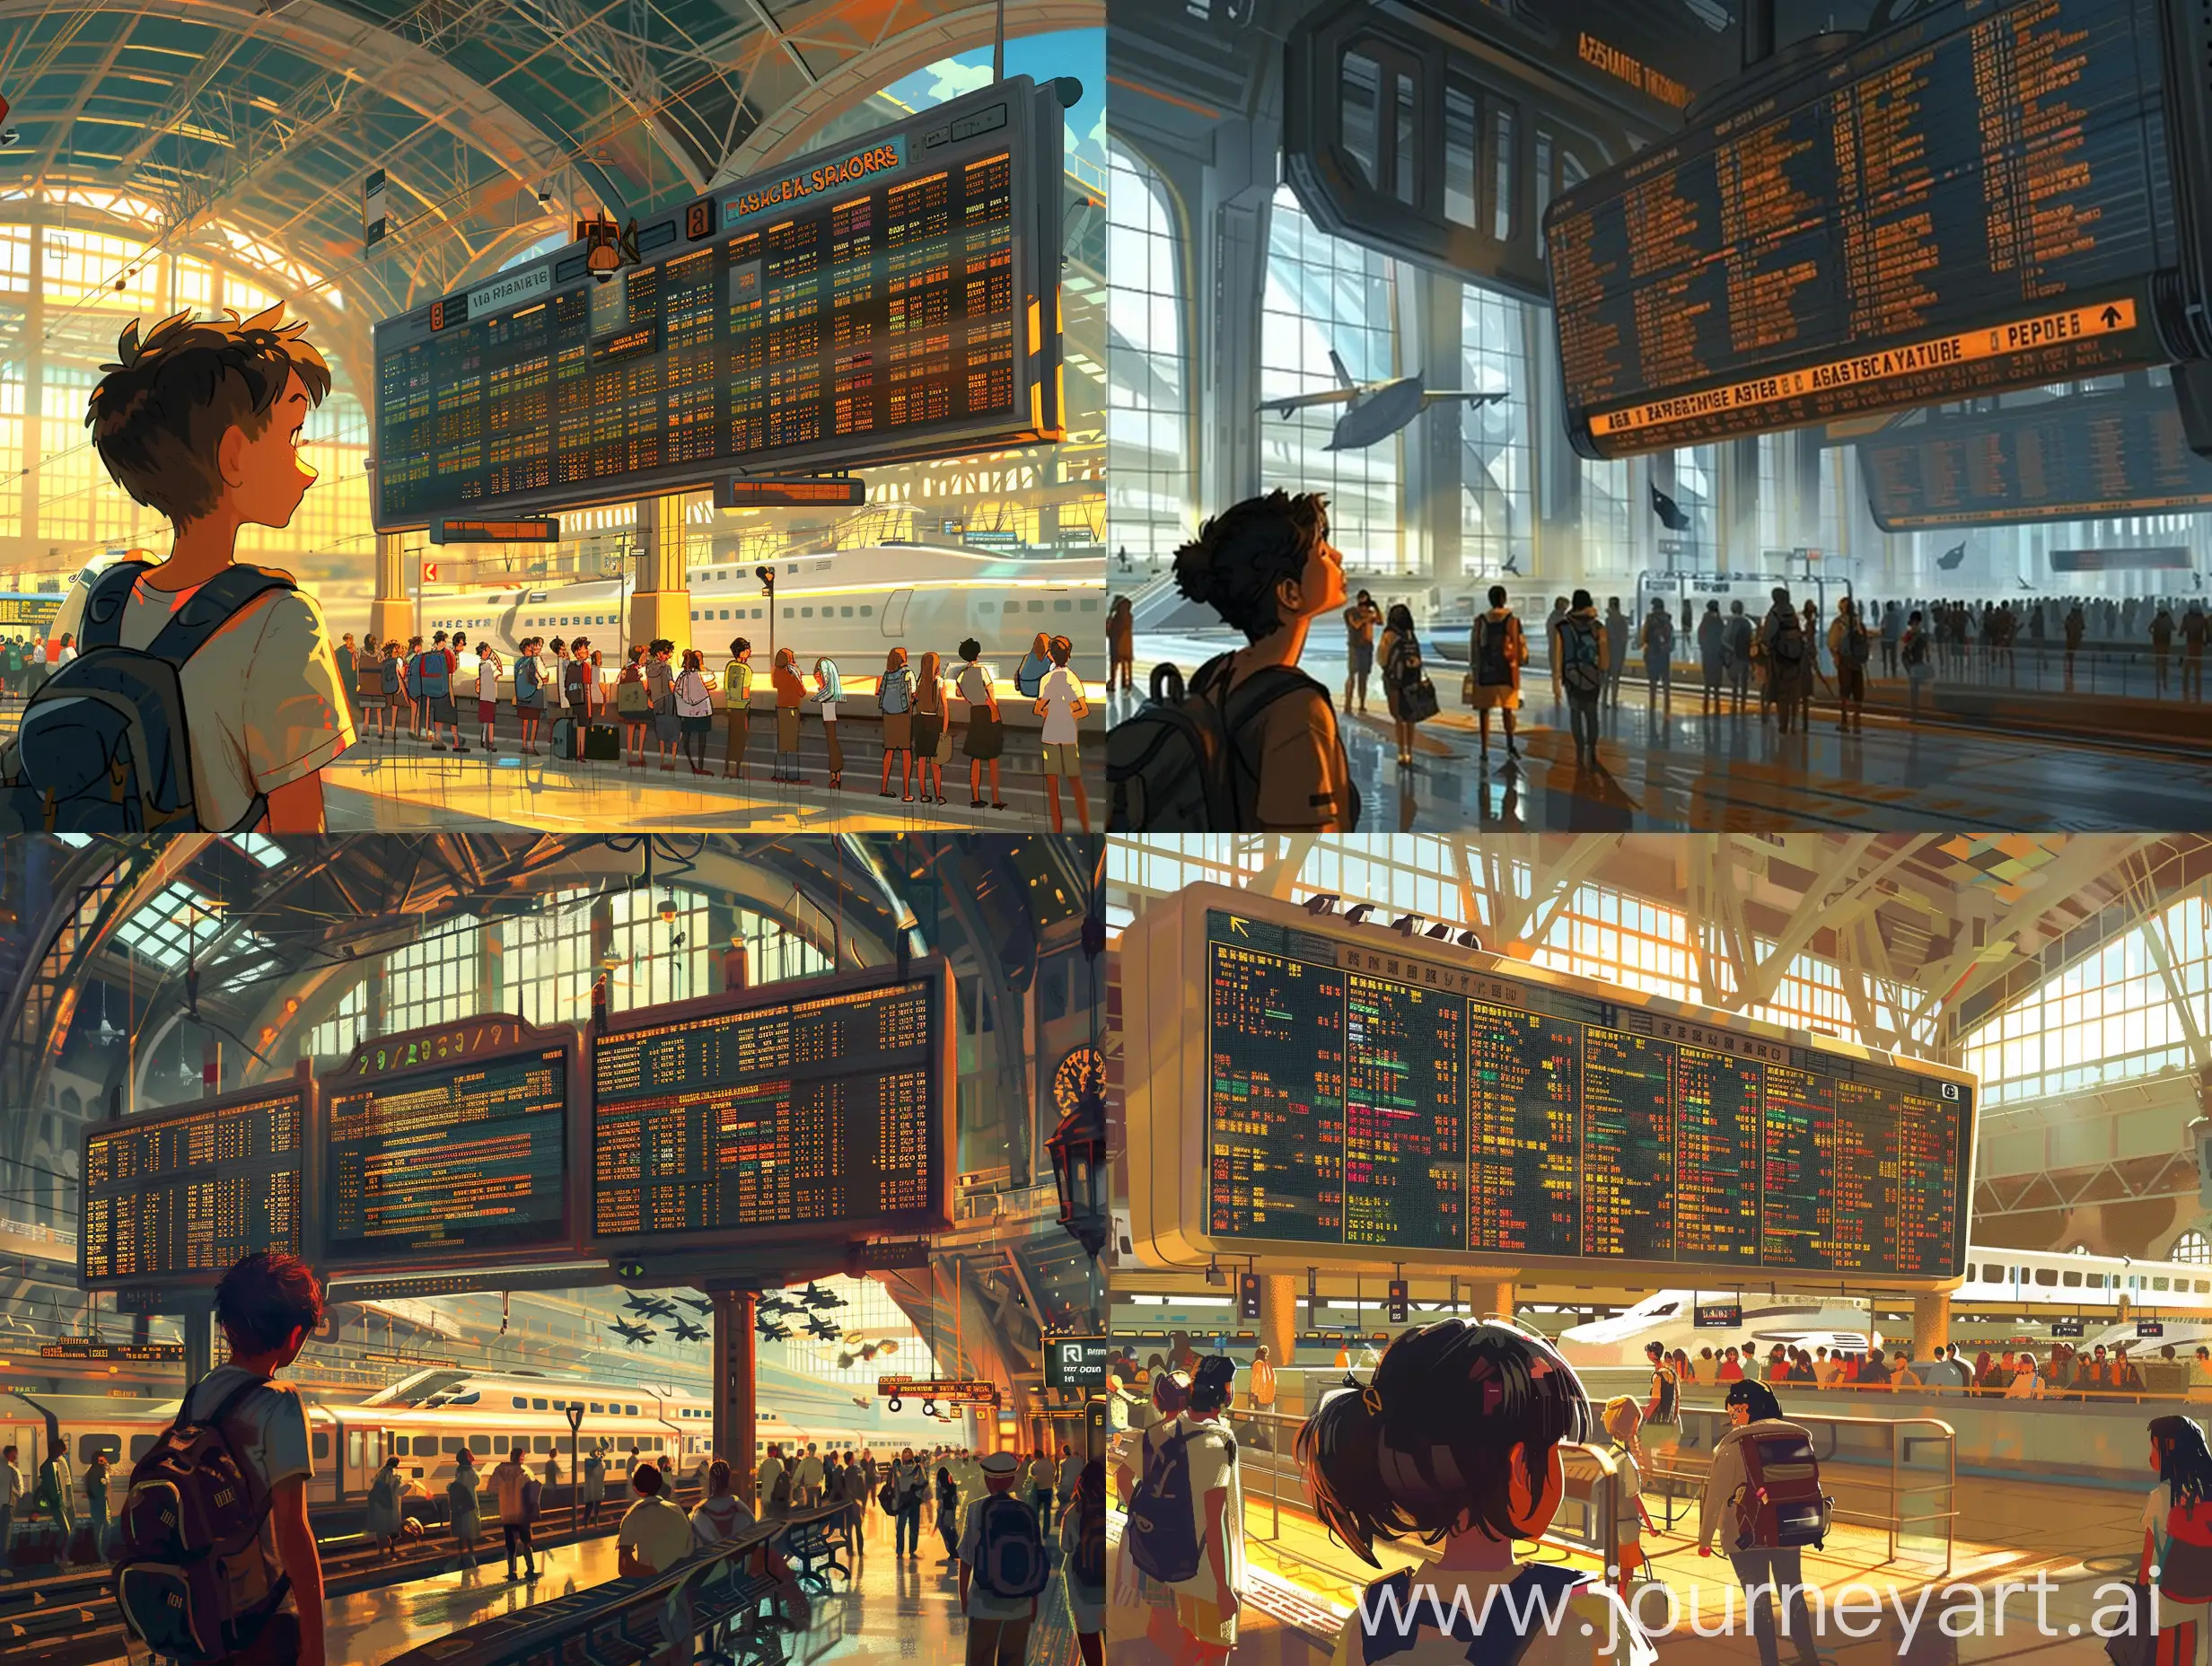 Busy-MultiLevel-Train-Station-with-Flying-Ships-and-Excited-Student